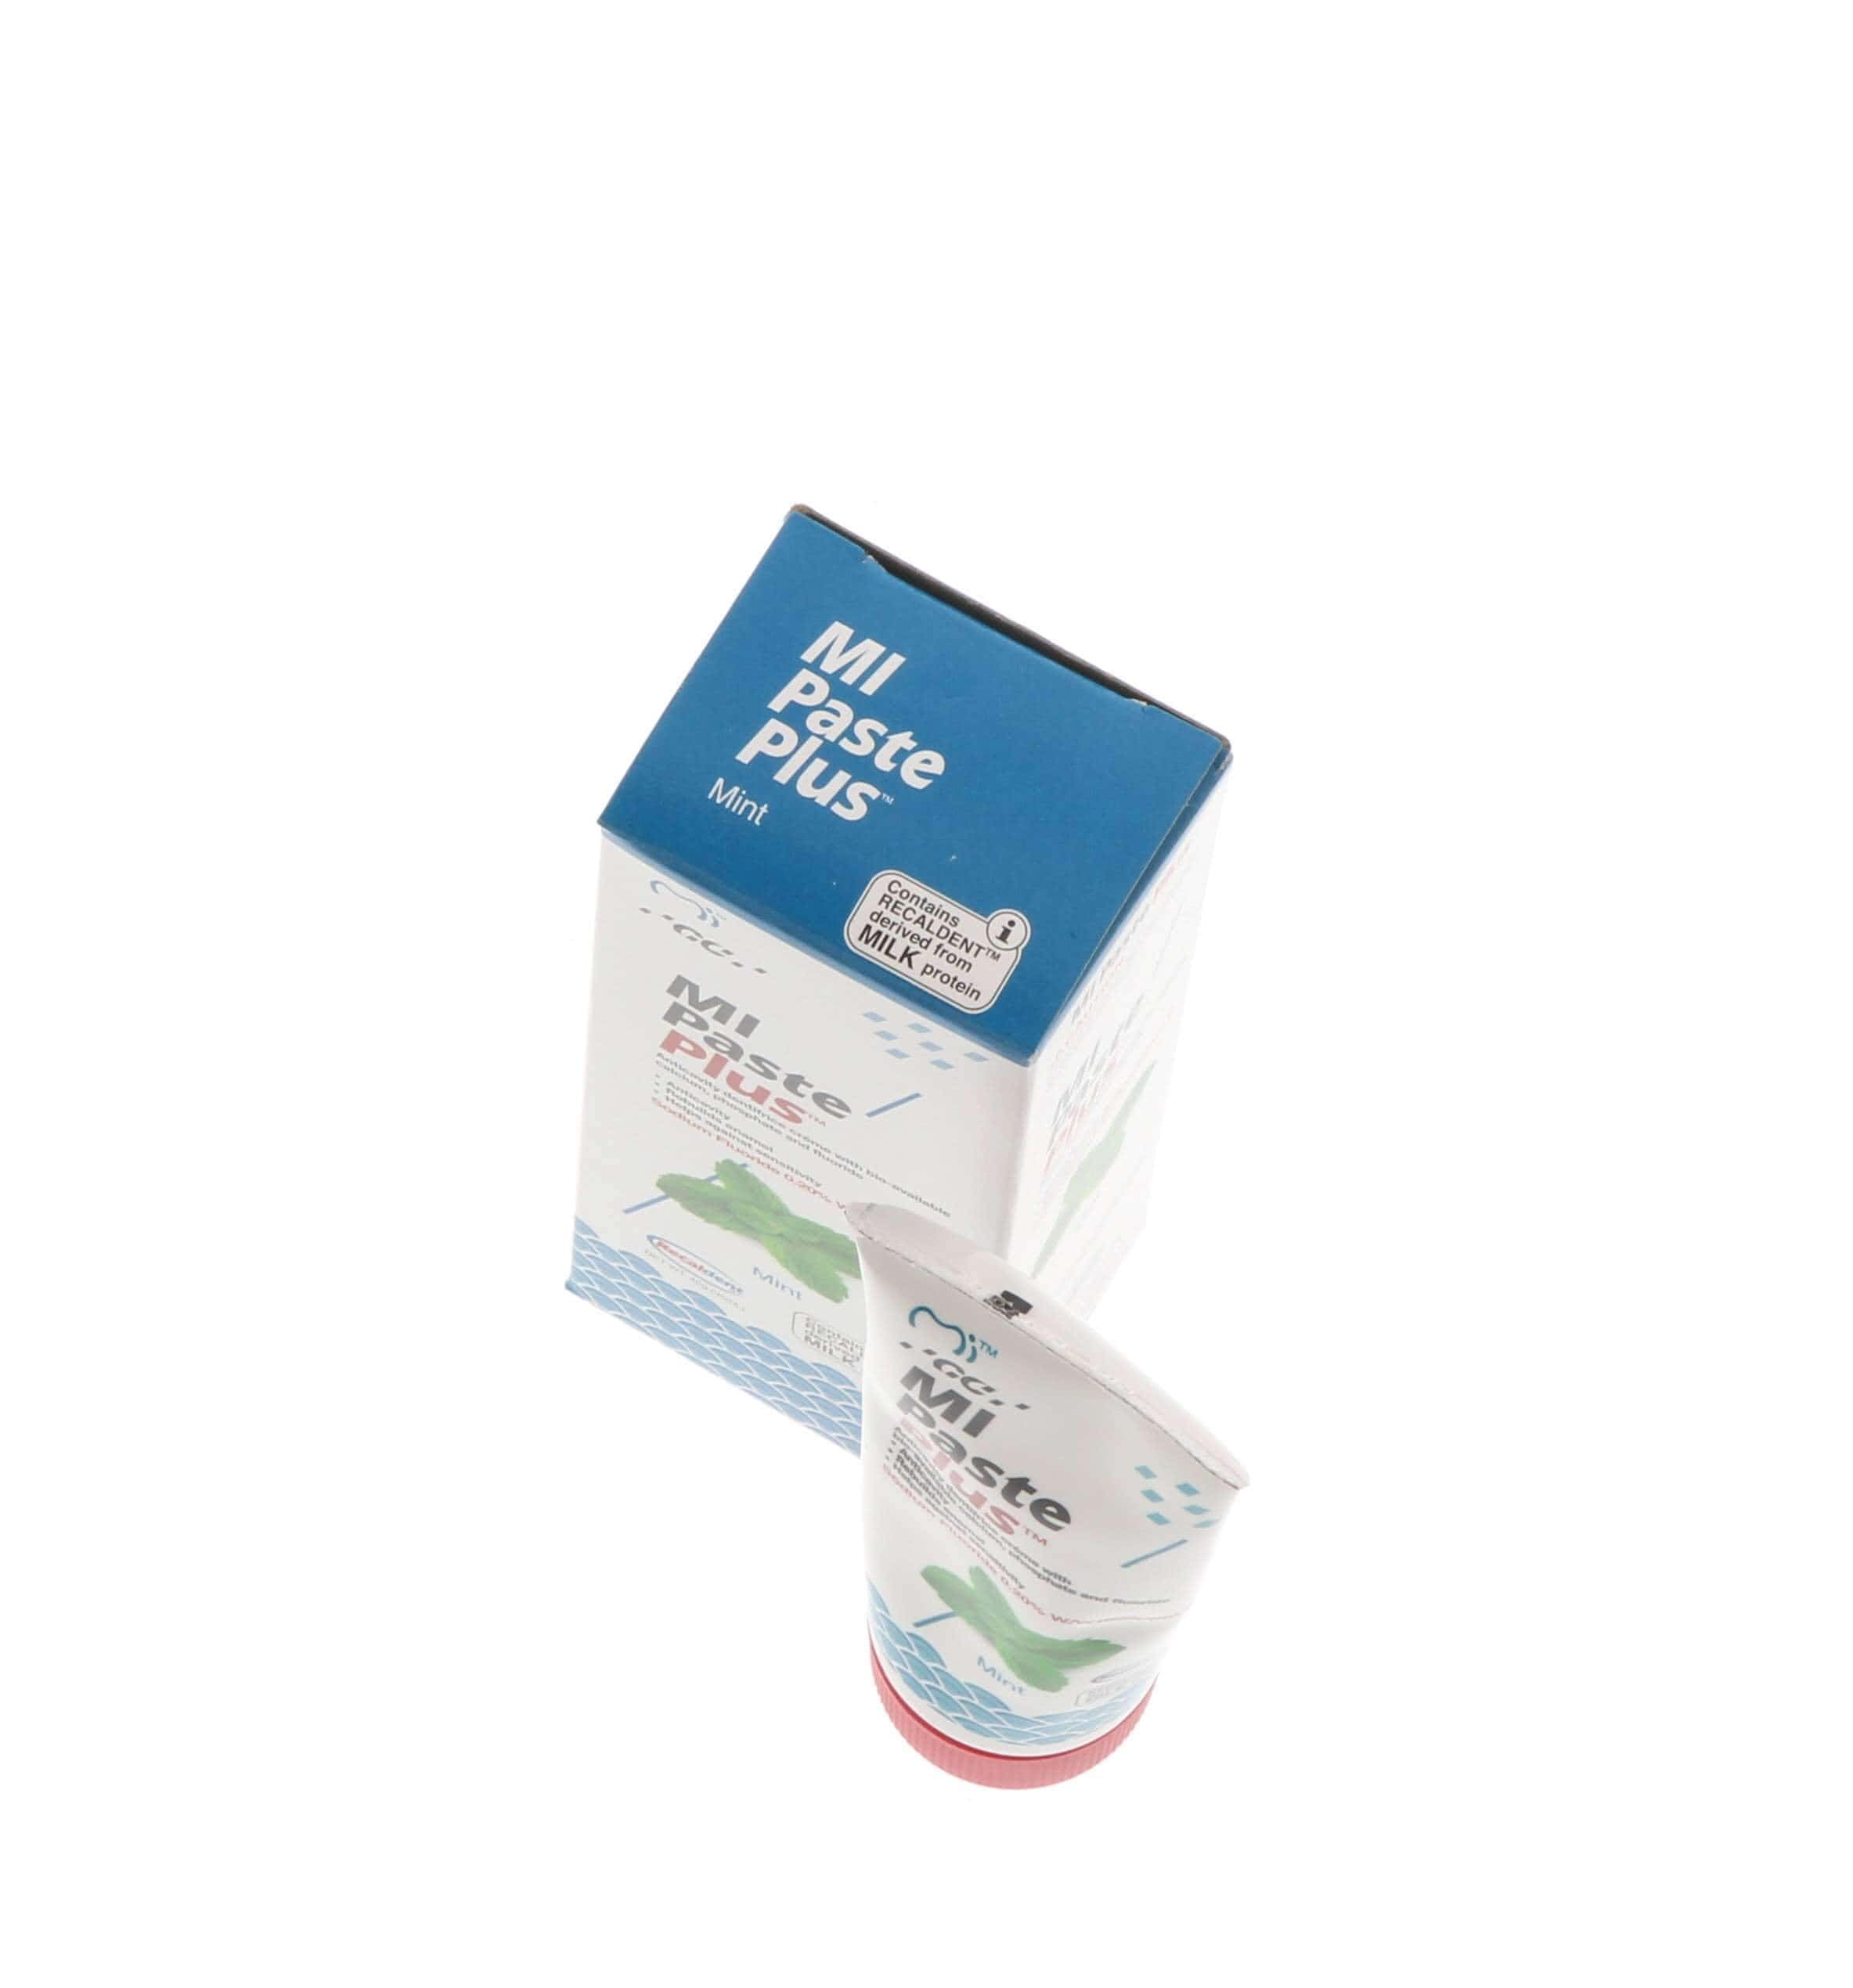 MI Paste Plus 422614 At Home Tooth Topical - Henry Schein Dental